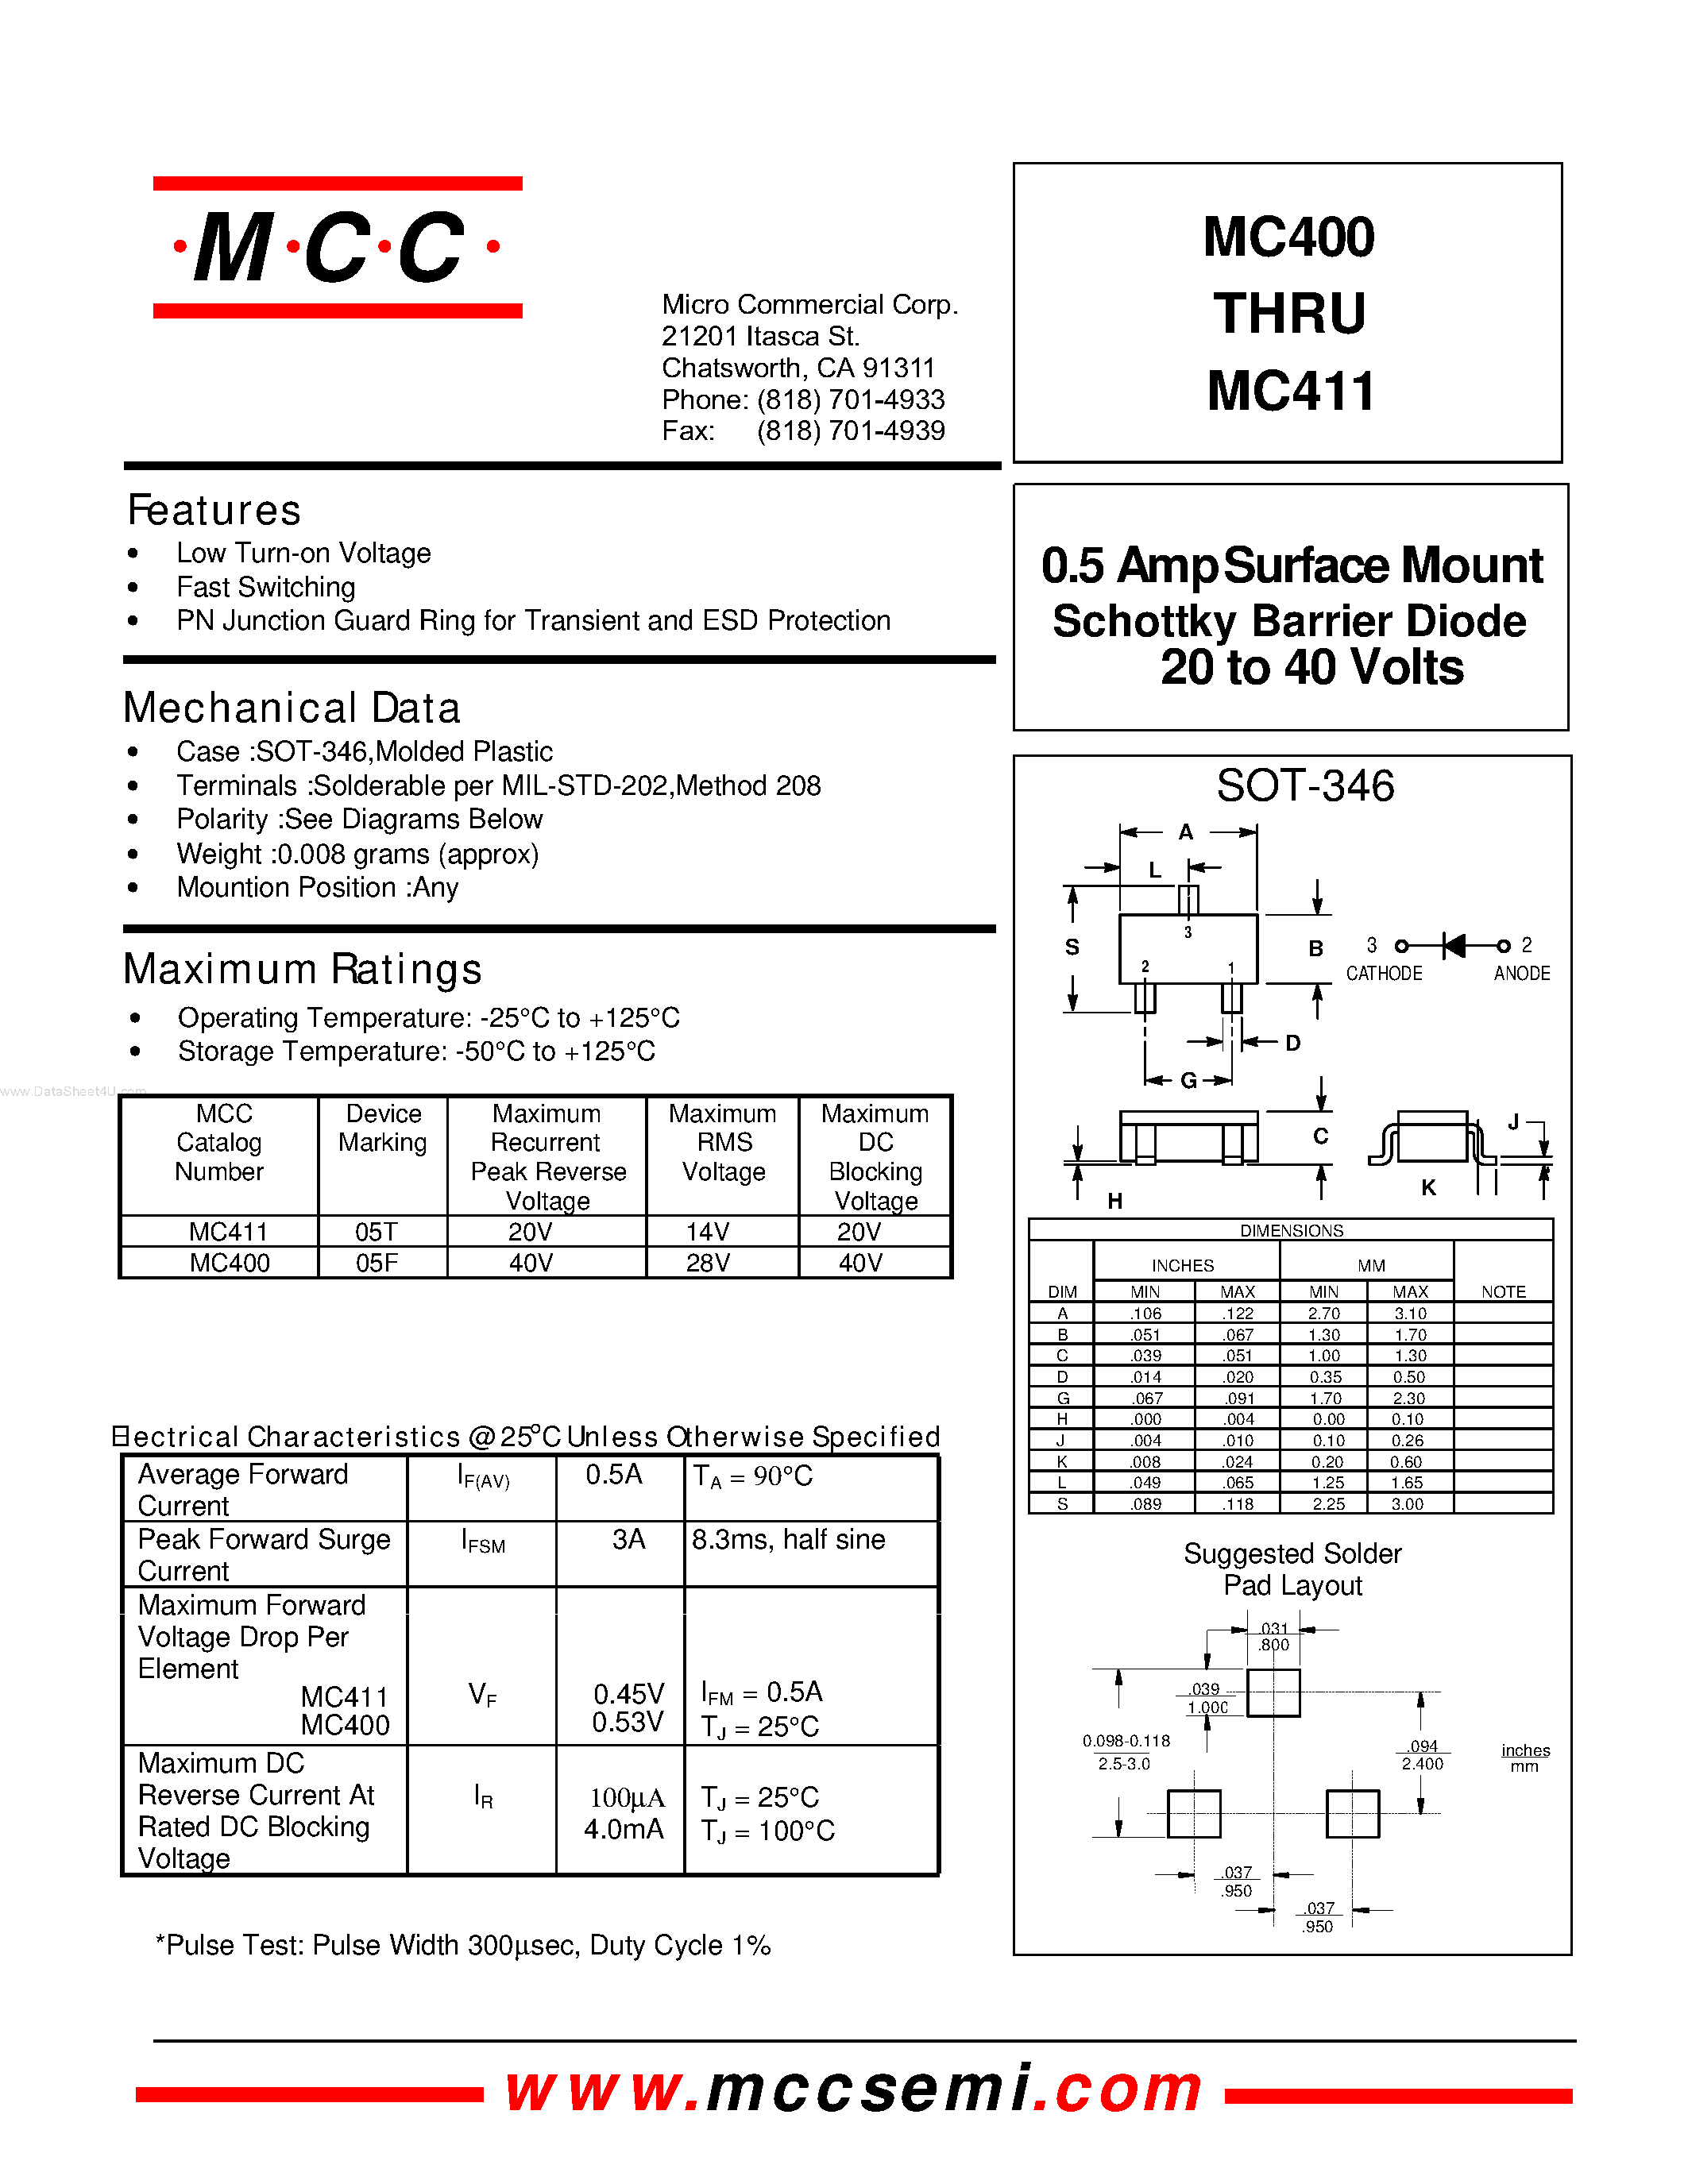 Datasheet MC400 - (MC400 - MC411) 20 to 40 Volts 0.5 Amp Surface Mount Schottky Barrier Diode page 1